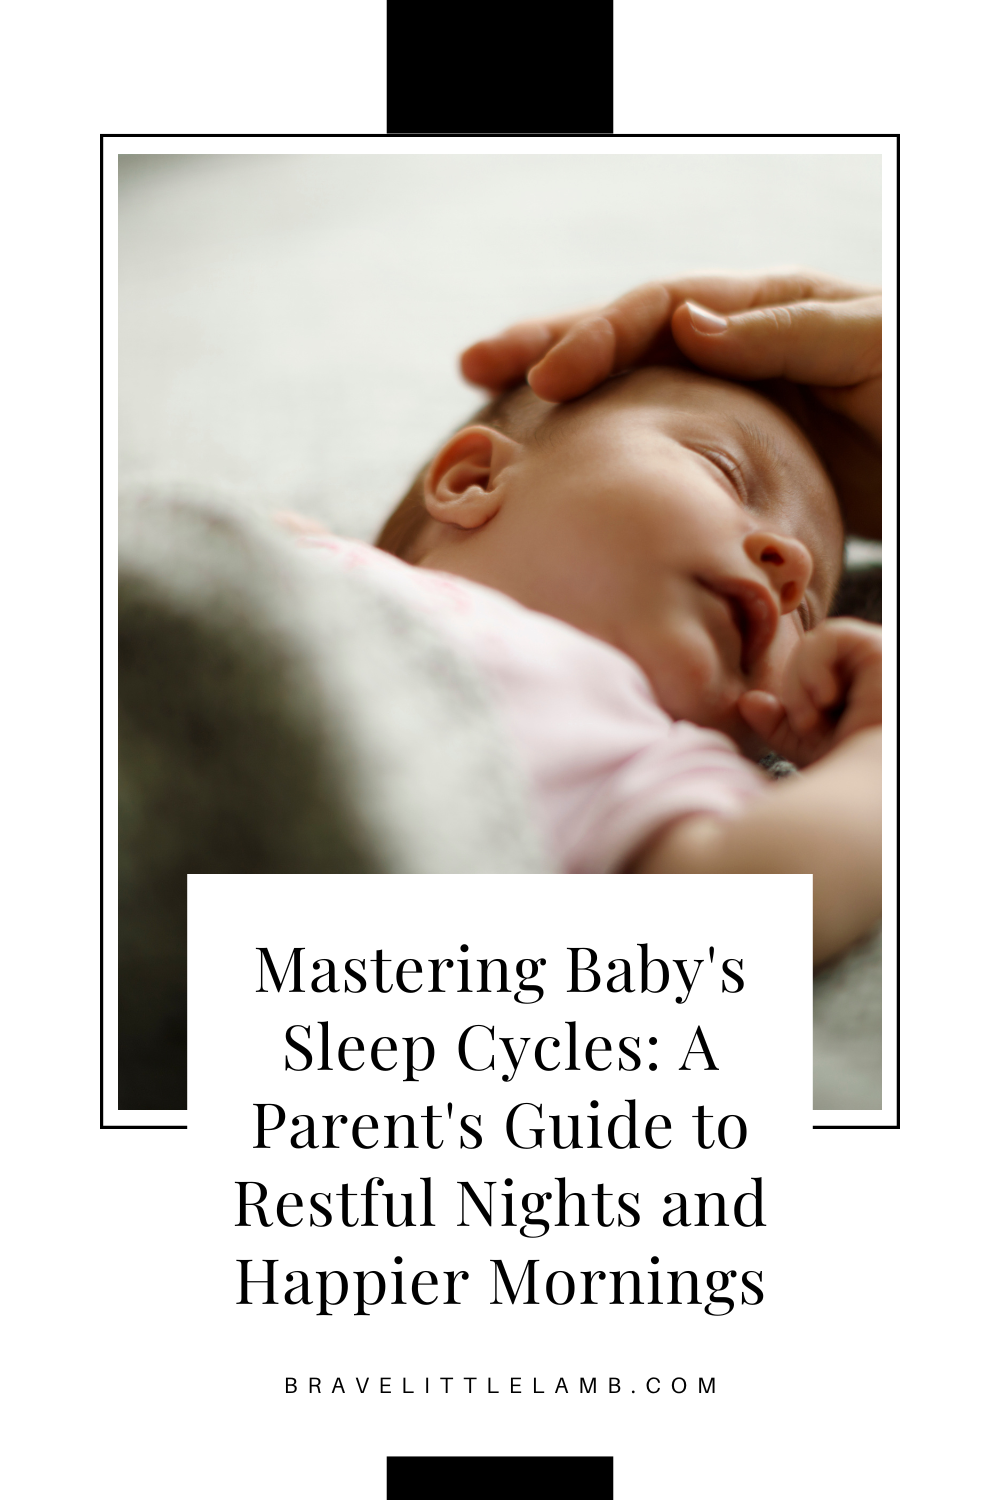 Mastering Baby's Sleep Cycles: A Parent's Guide to Restful Nights and Happier Mornings